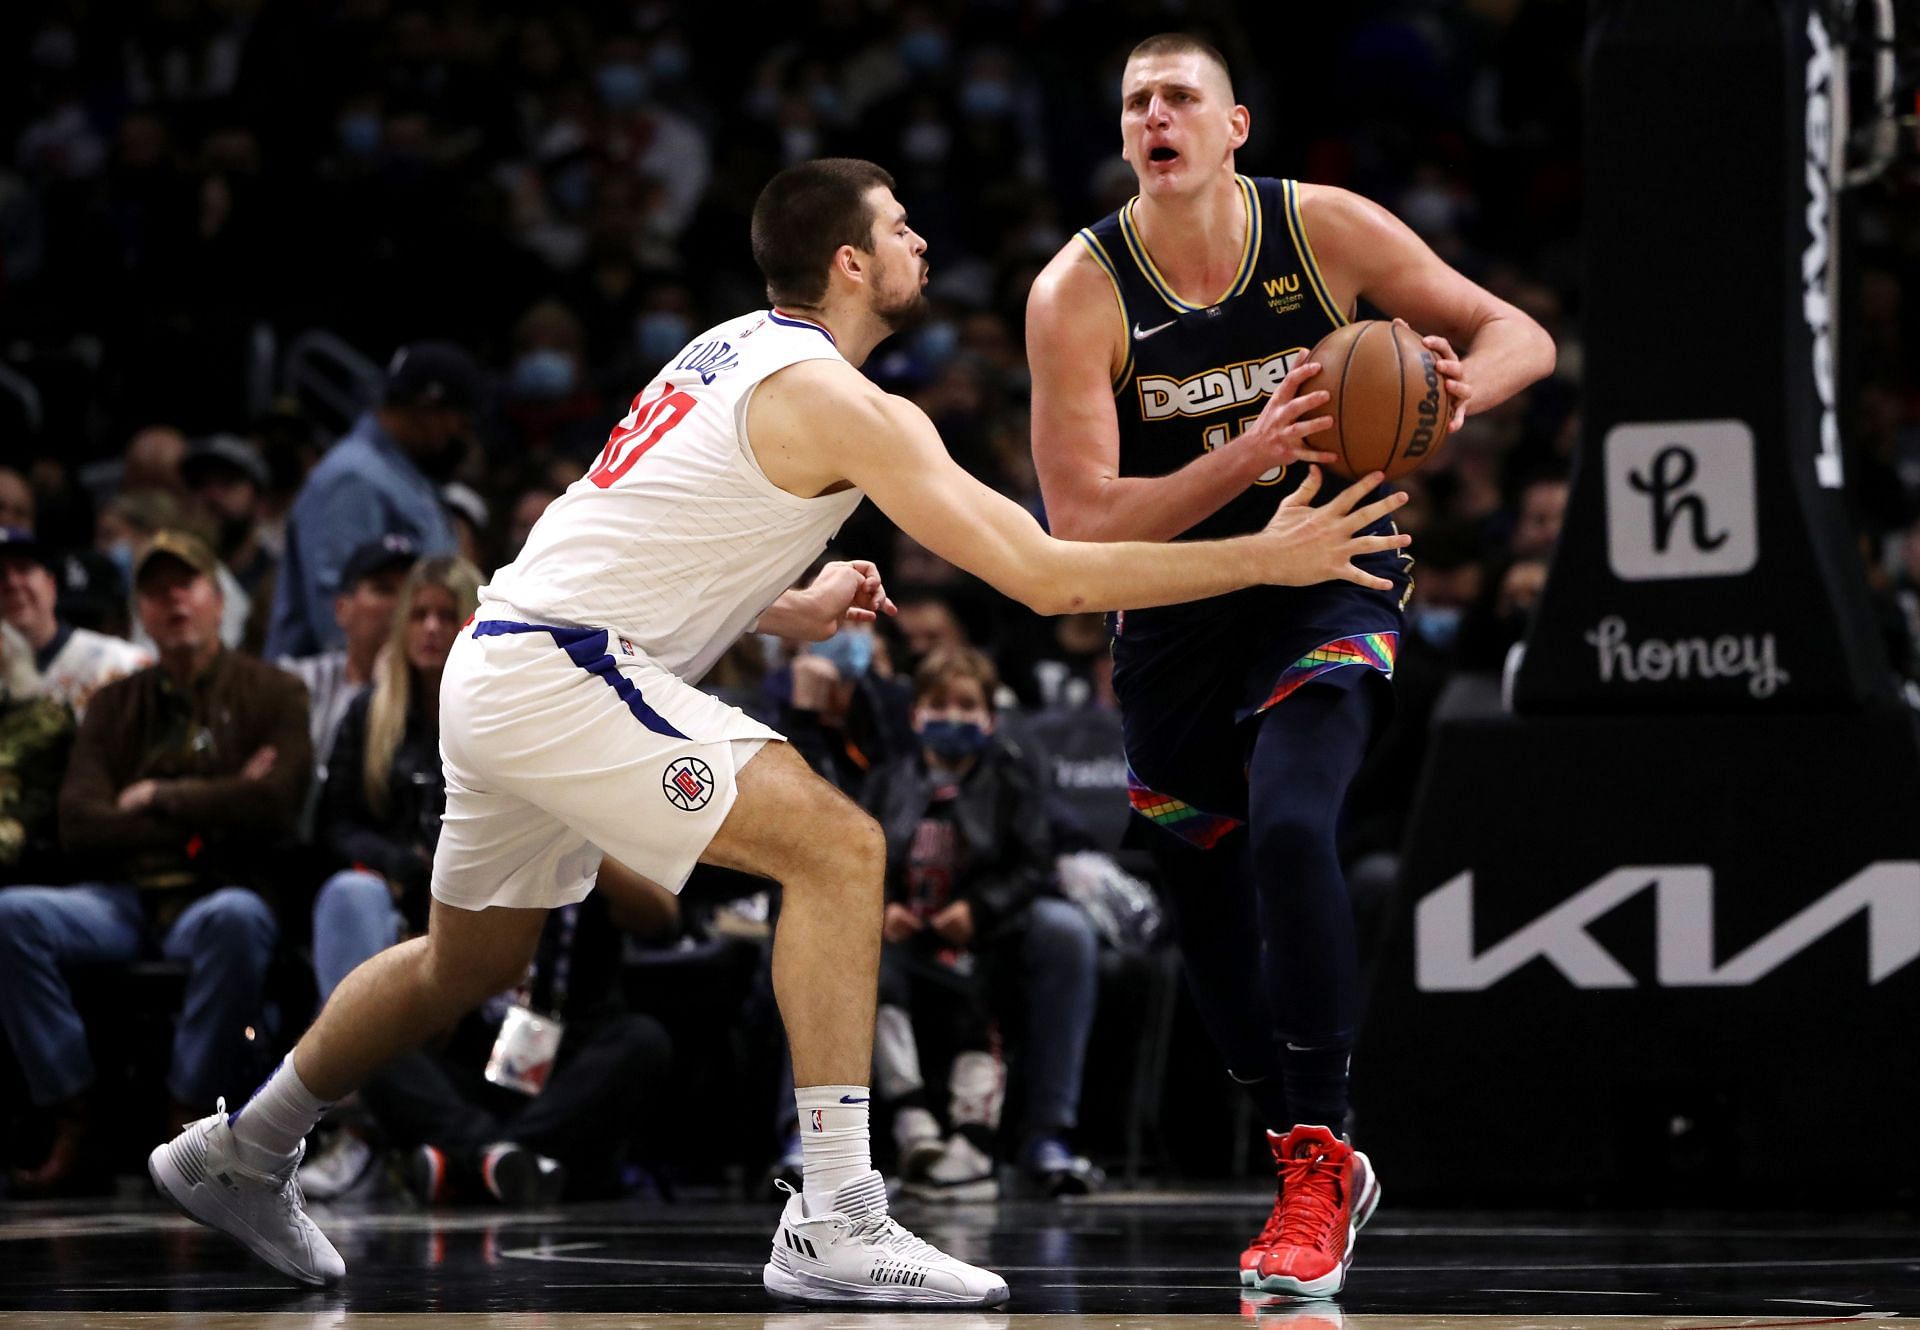 Nikola Jokic of the Denver Nuggets against Ivica Zubac of the LA Clippers